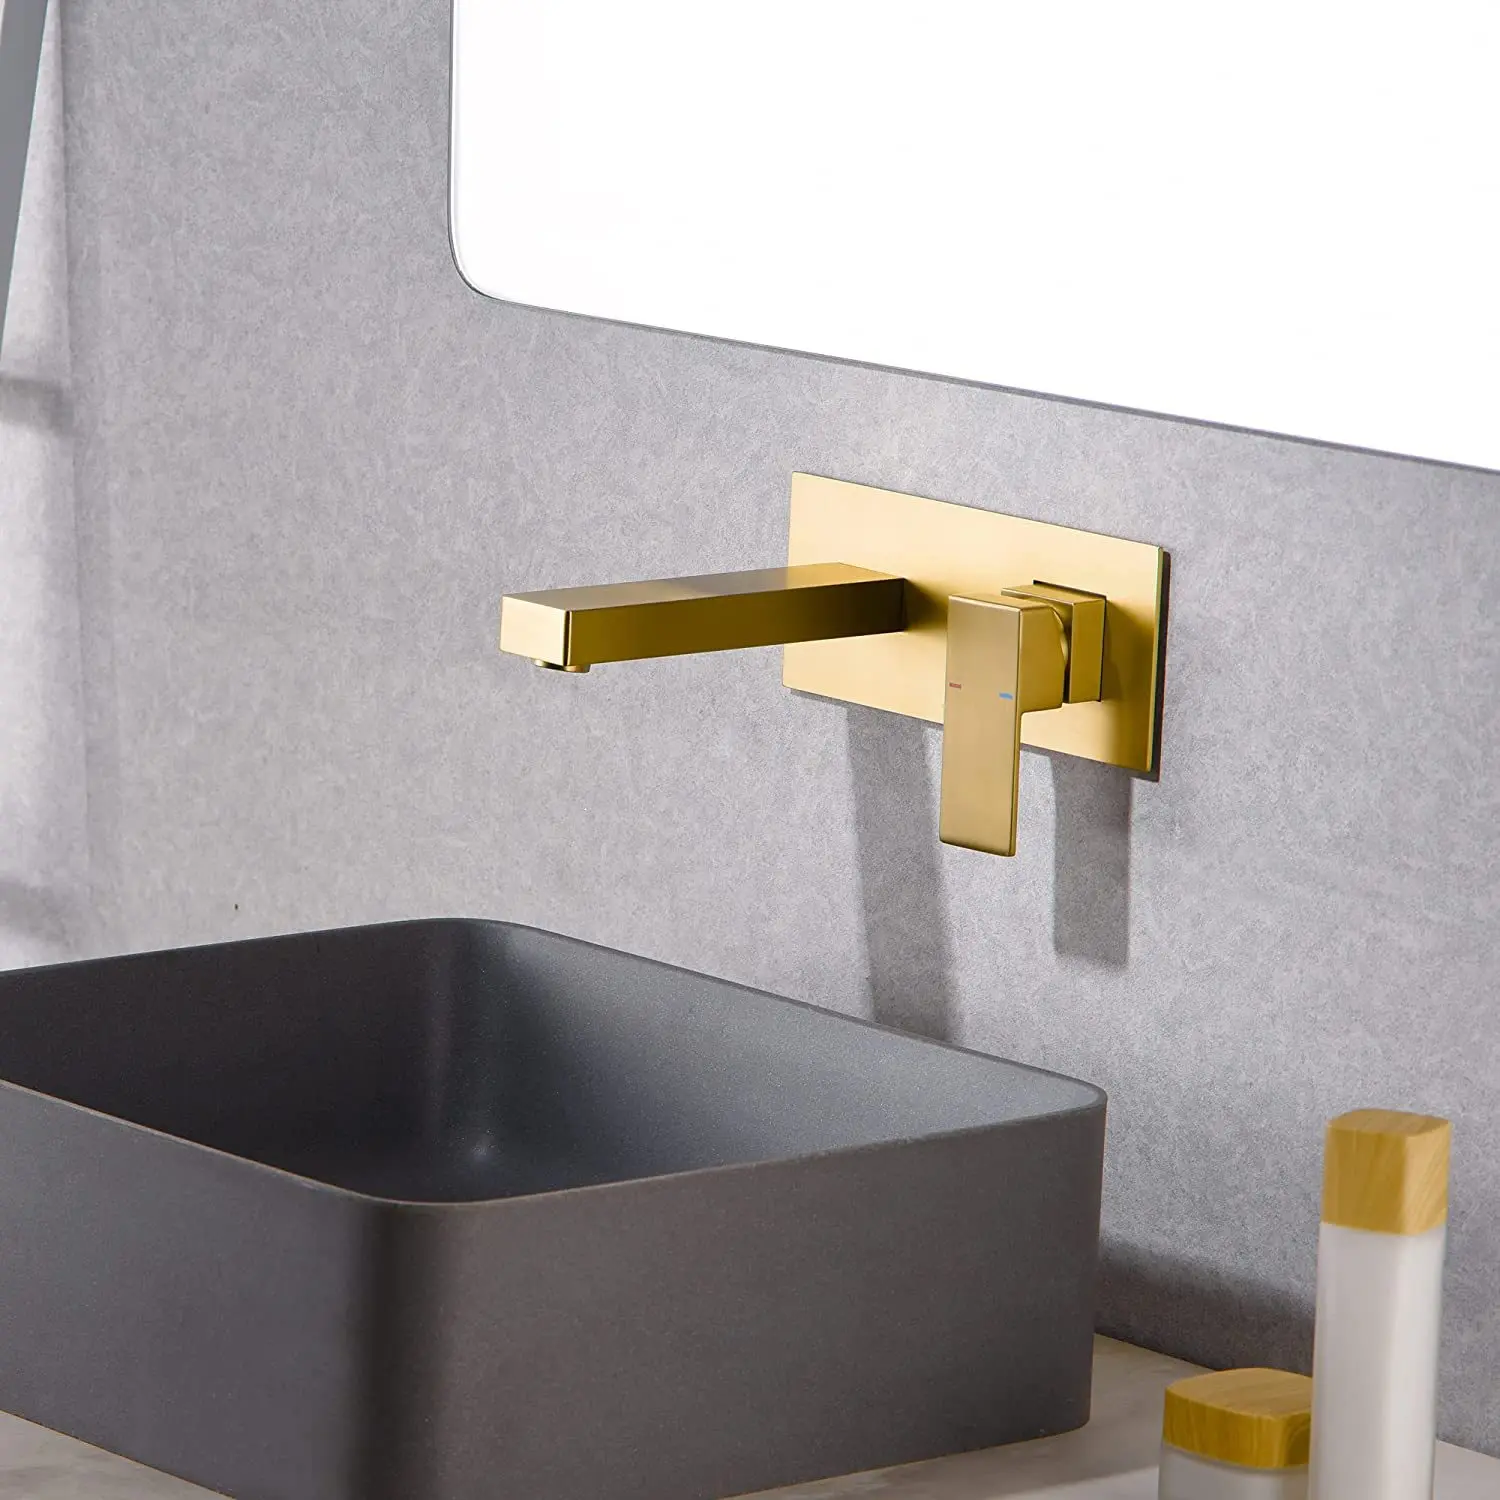 

Basin Faucet Wall Mounted Bathroom Washbasin Hot Cold Water Tap Gold Embedded Mixer Stainless Steel Bathtub Tub Accessories